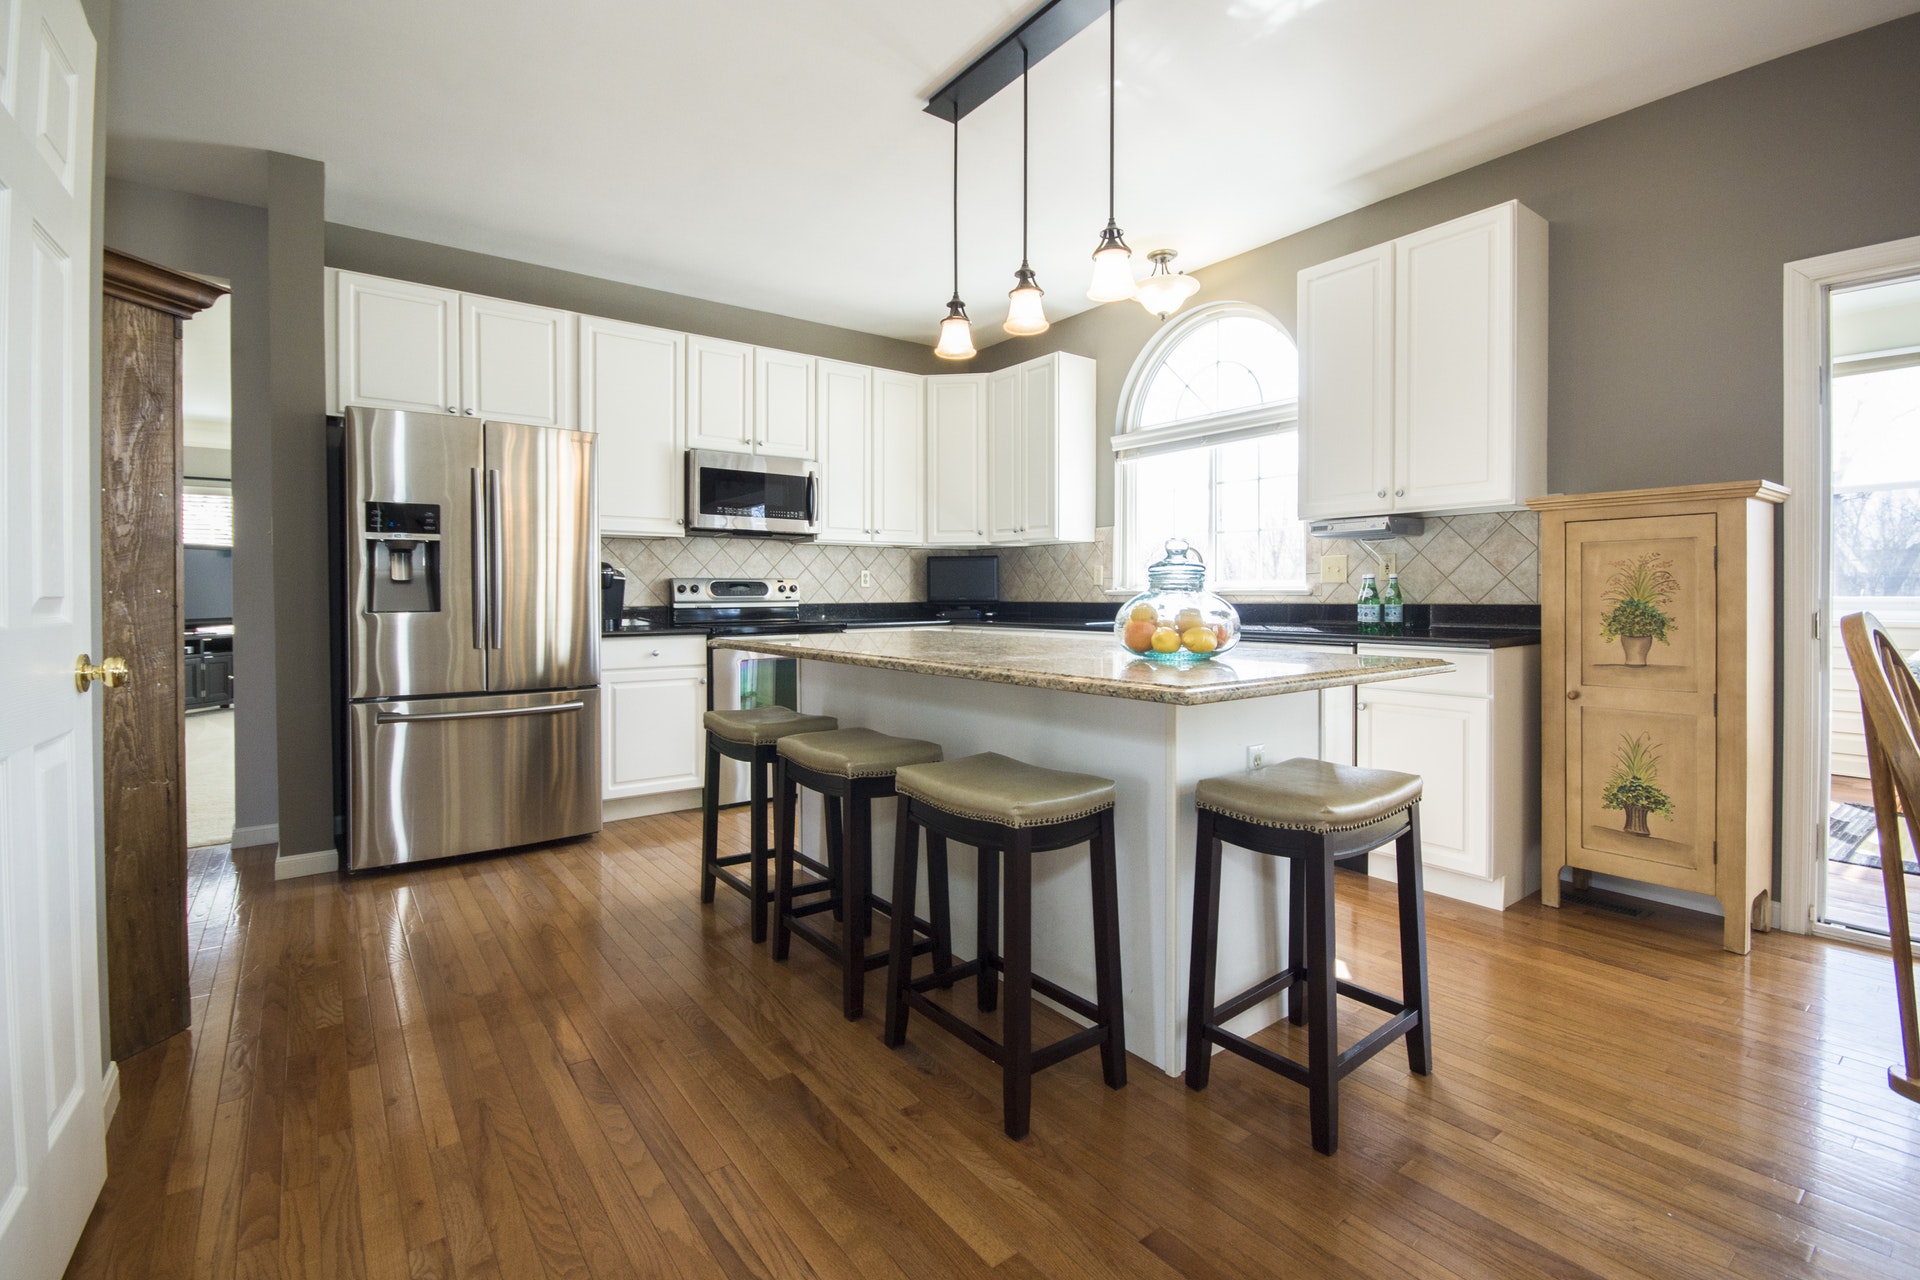 Kitchen Remodeling on a Budget in Anaheim, CA - Summit Cabinets